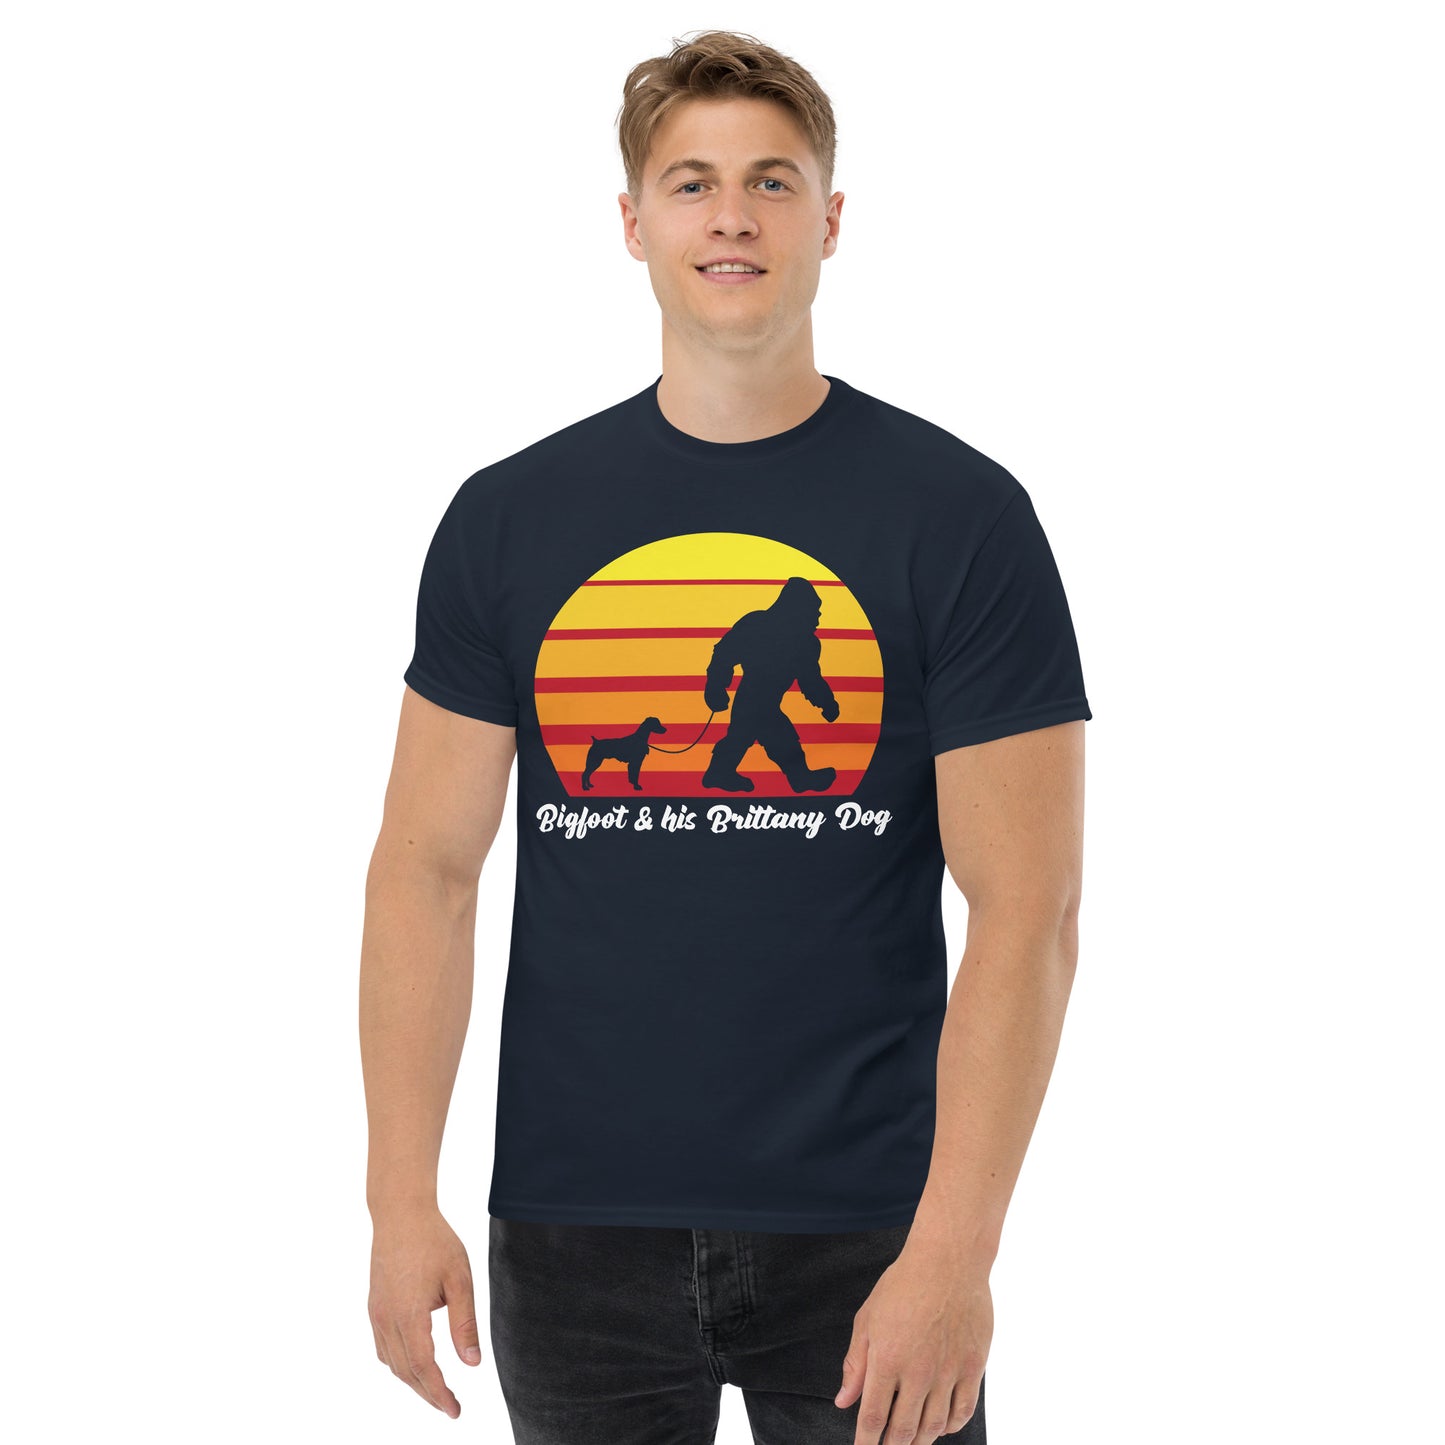 Big foot and his Brittany dog men’s navy t-shirt by Dog Artistry.